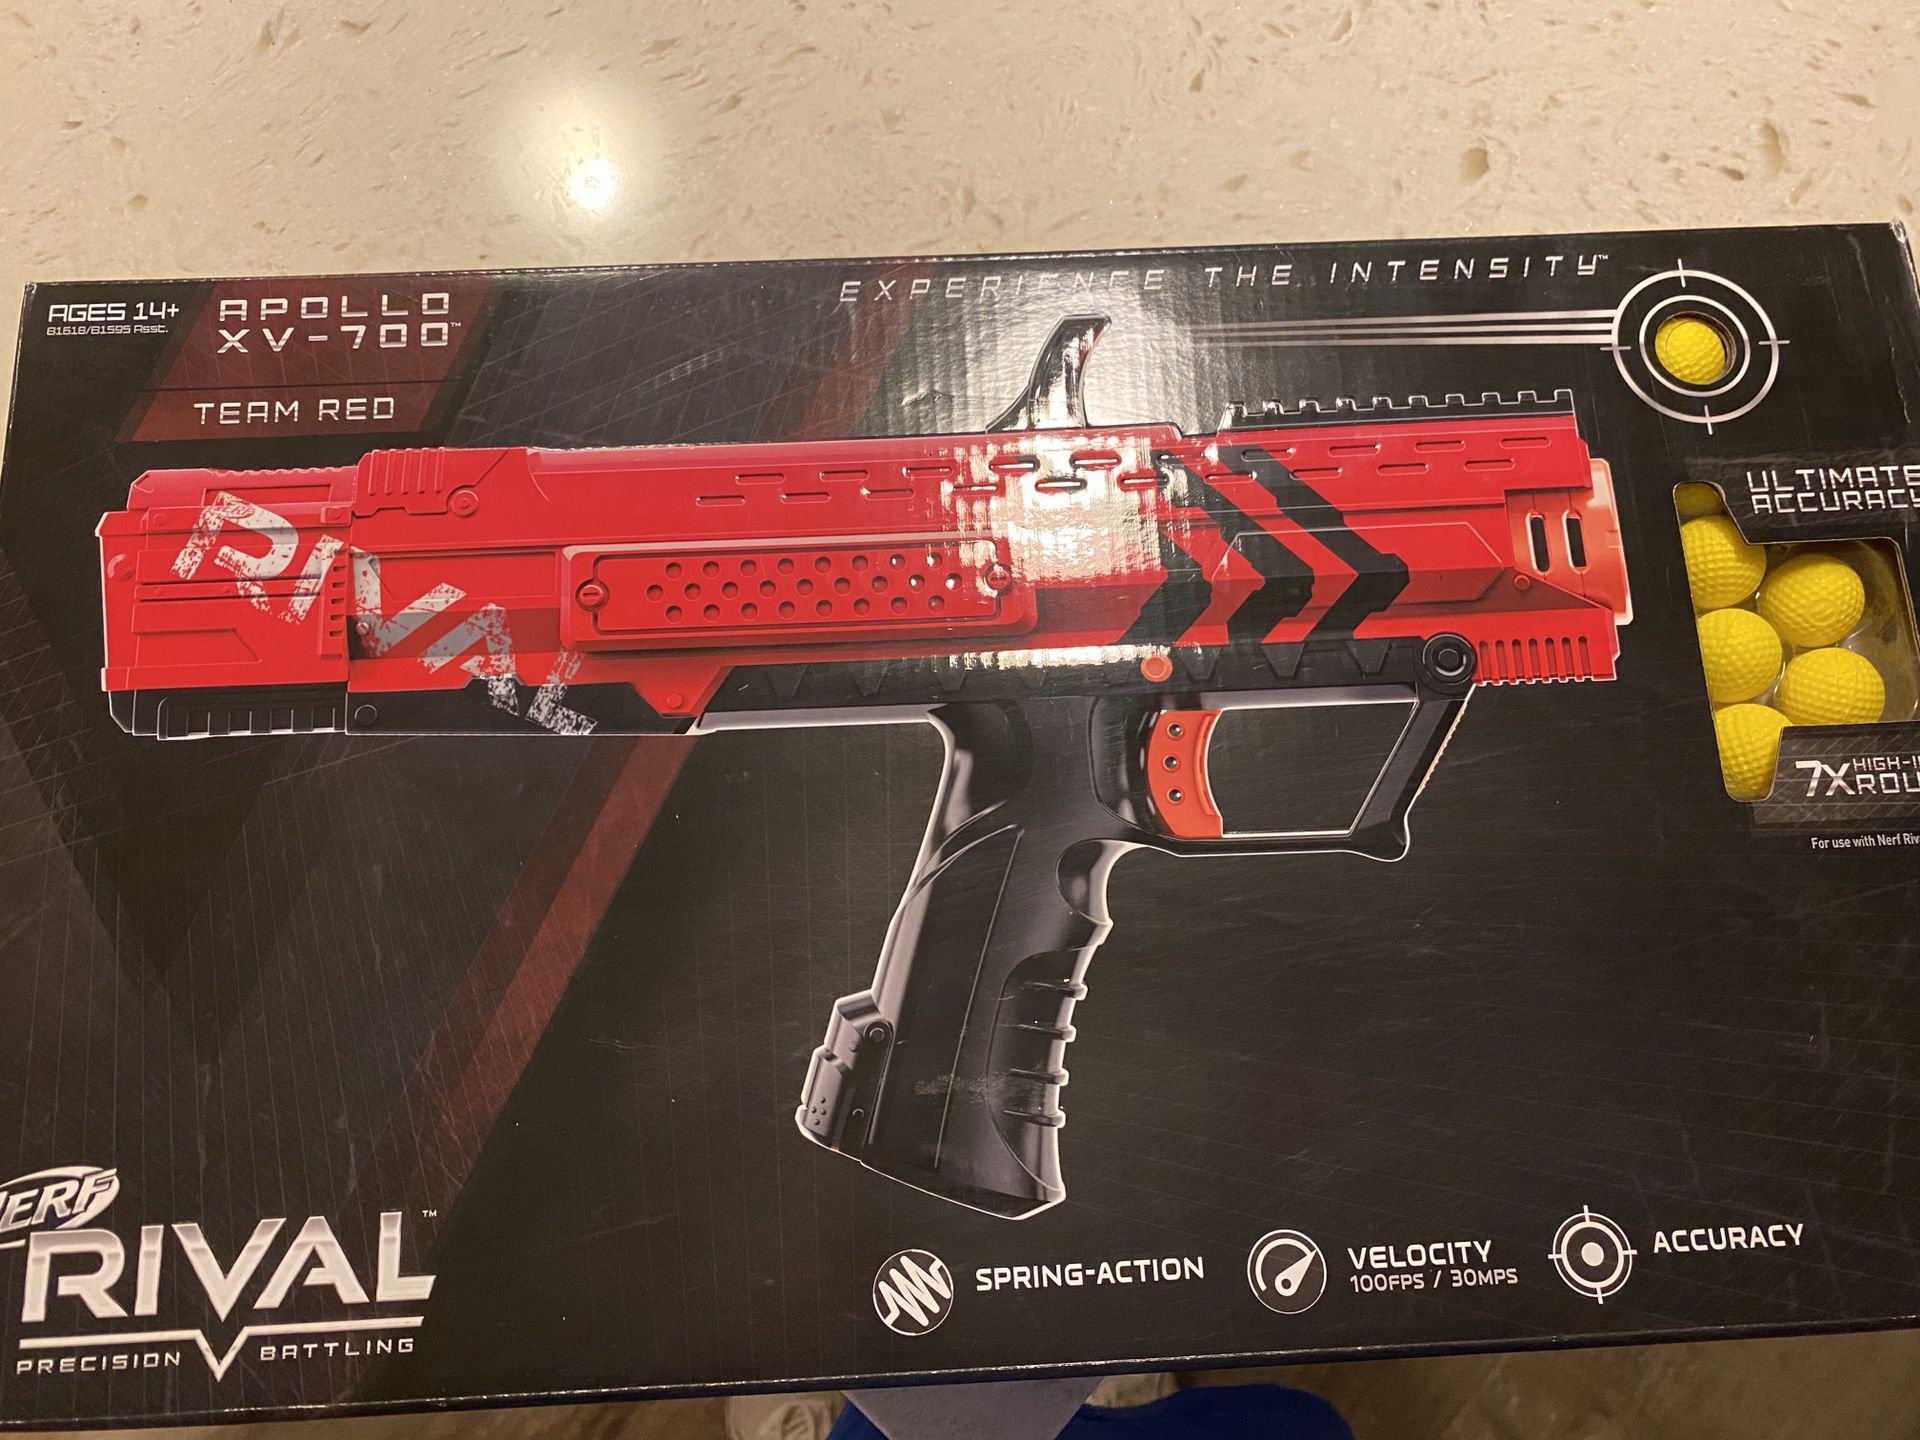 Nerf Rival team red